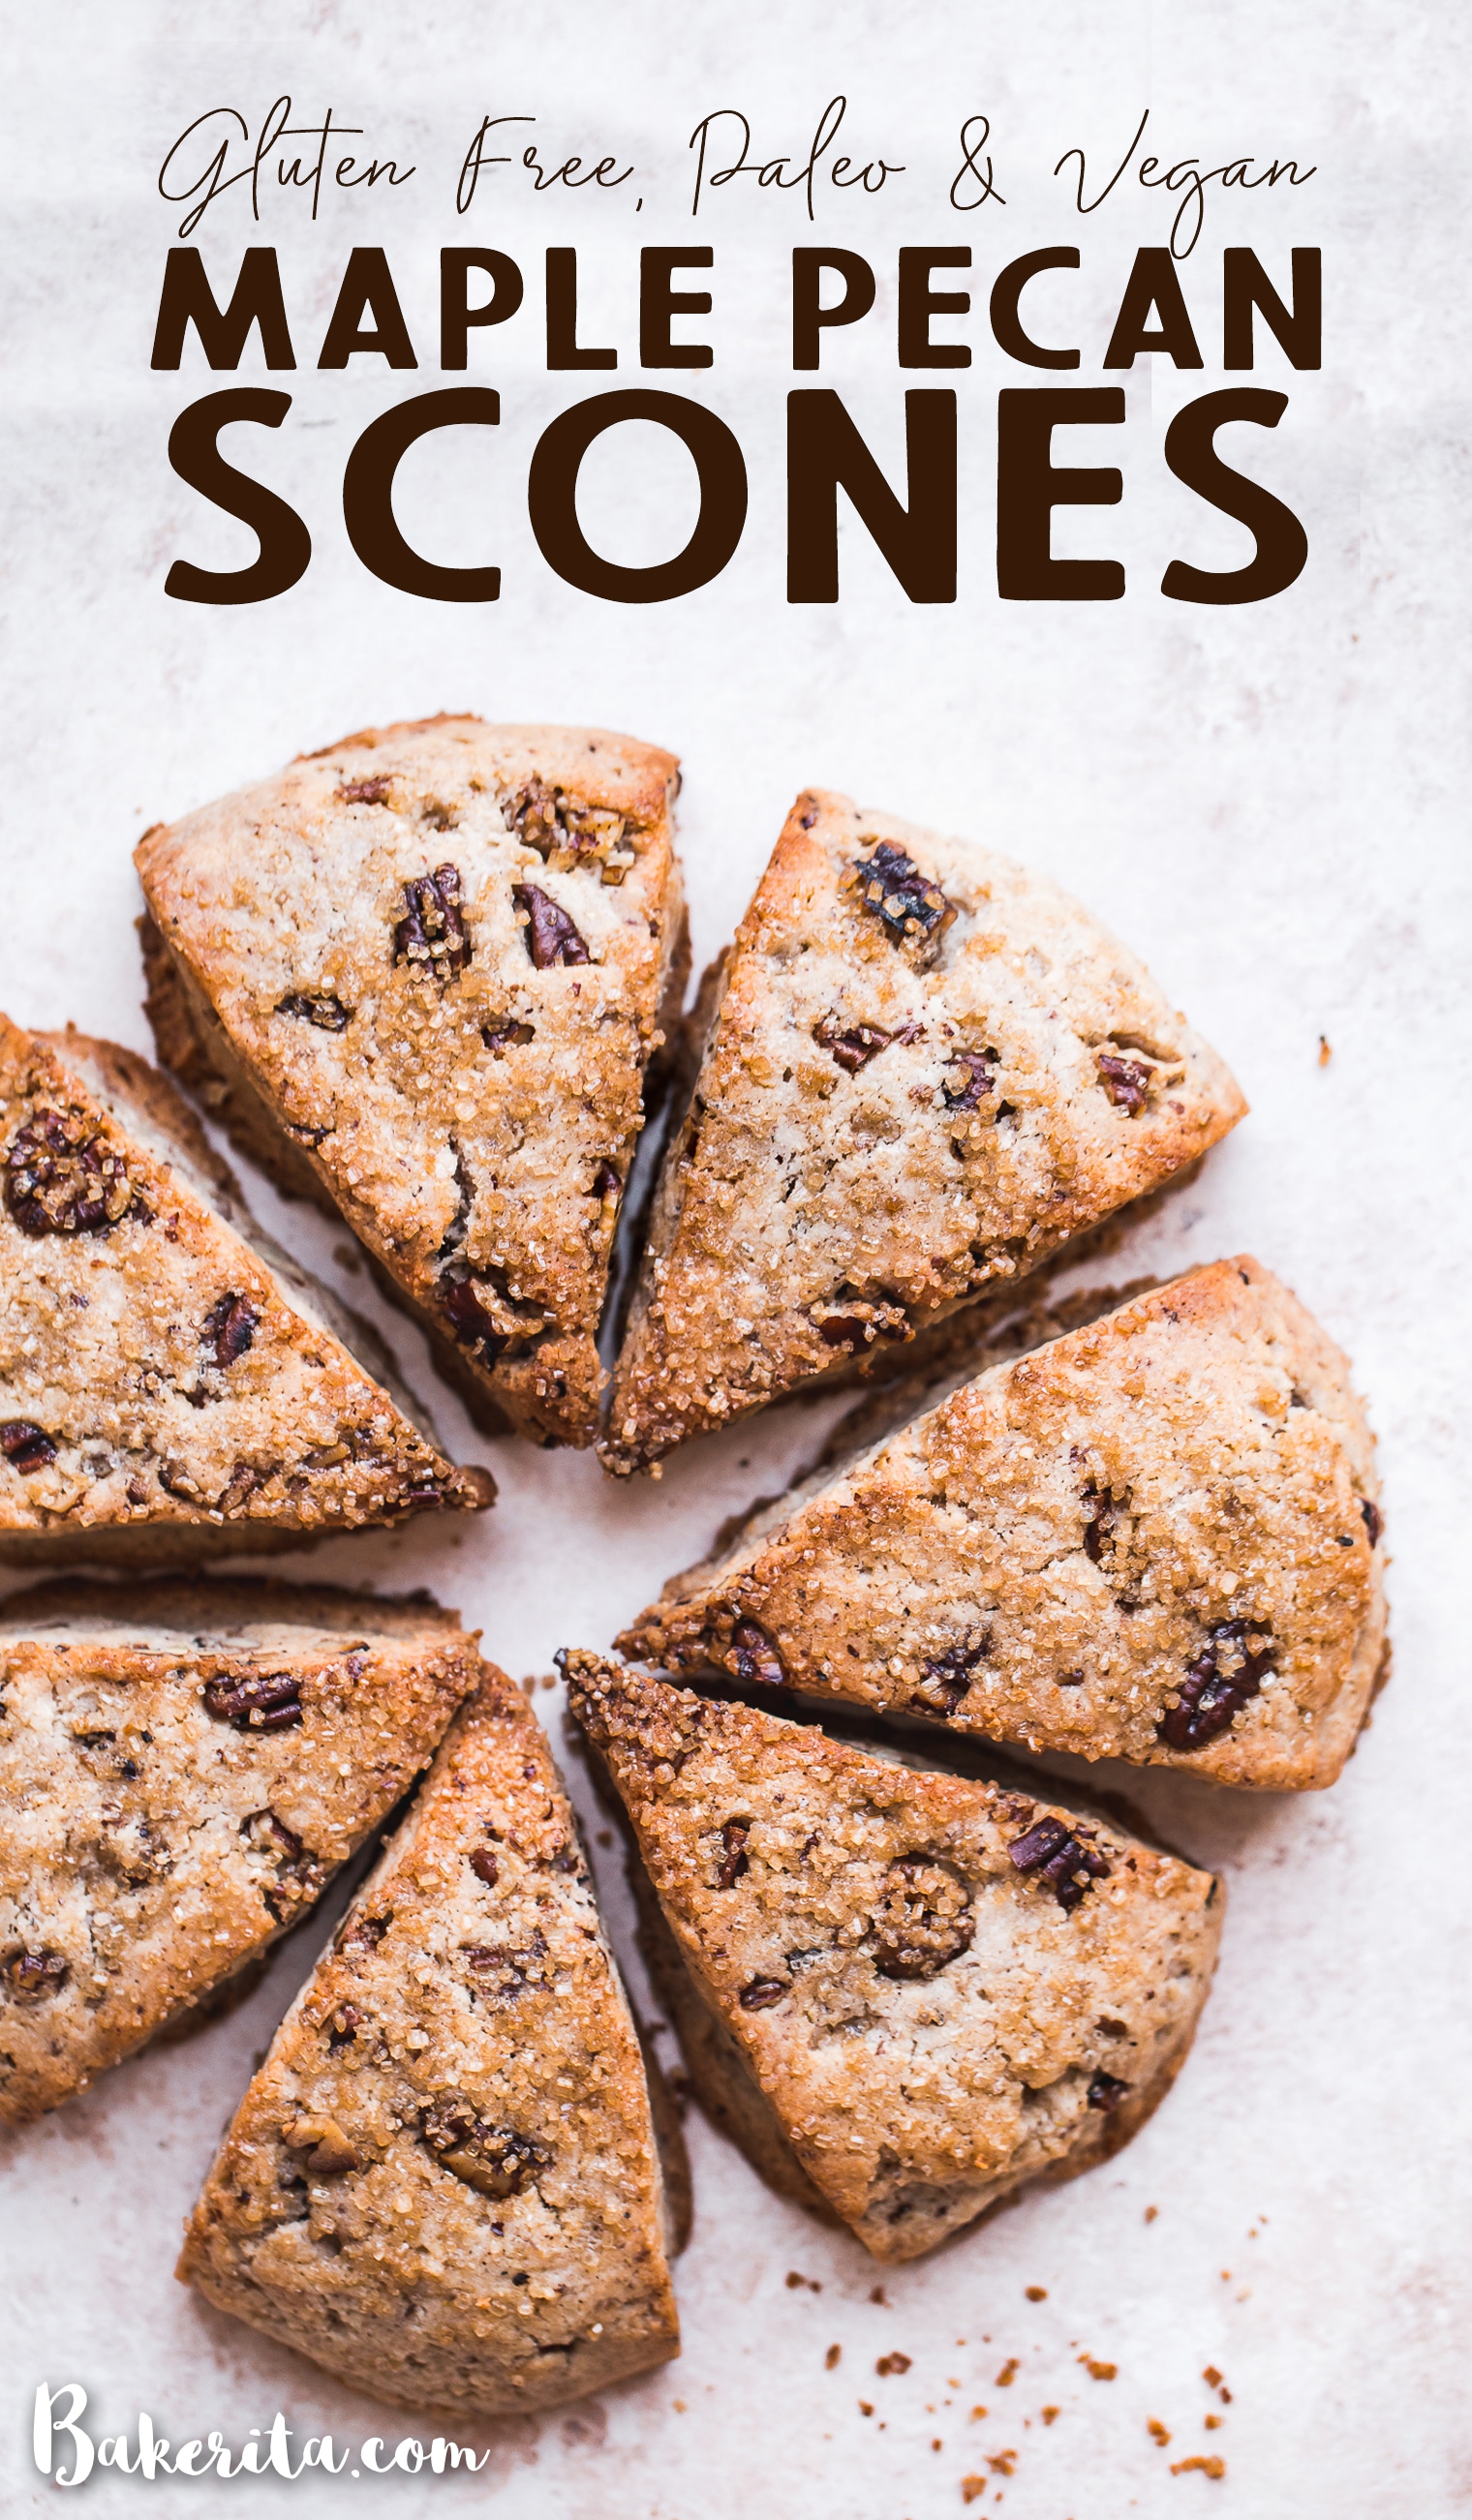 These Gluten-Free Vegan Maple Pecan Scones are tender on the inside with a crunchy, golden crust! Sweetened with a bit of maple syrup and studded with toasted pecans, these scones are delicious for breakfast, brunch, or as a mid-day snack.